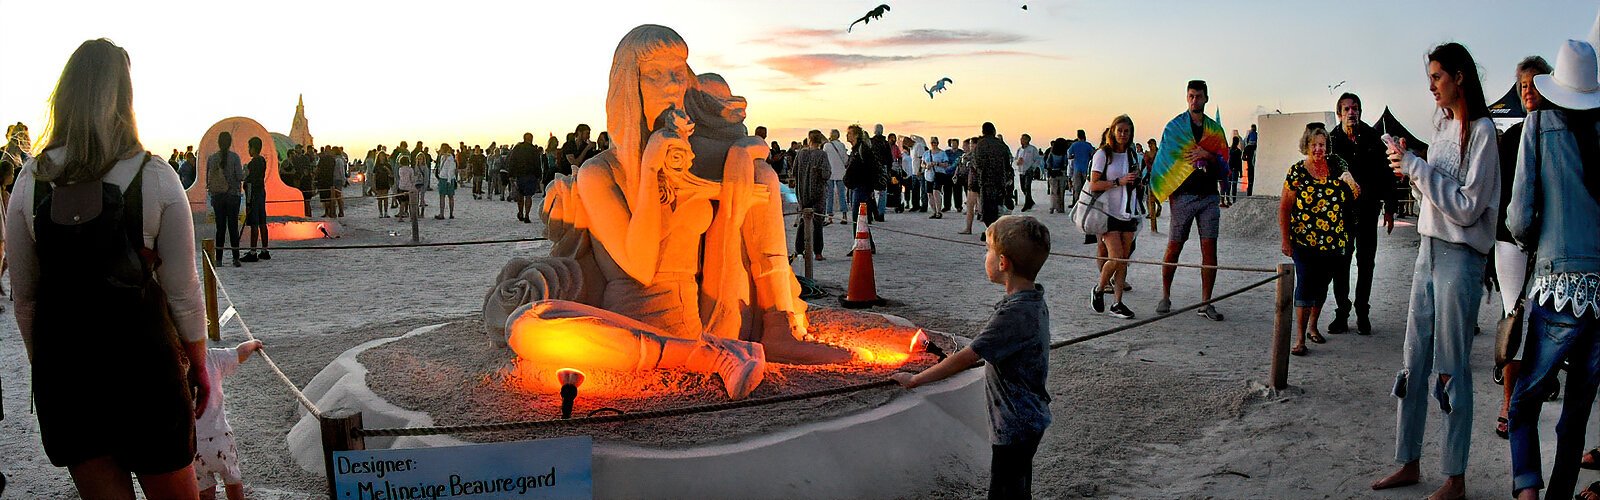 A youngster takes time to admire Mélineige Beauregard’s exquisite sculpture, “Take Time to Smell the Roses," as flood lights illuminate it at sunset.